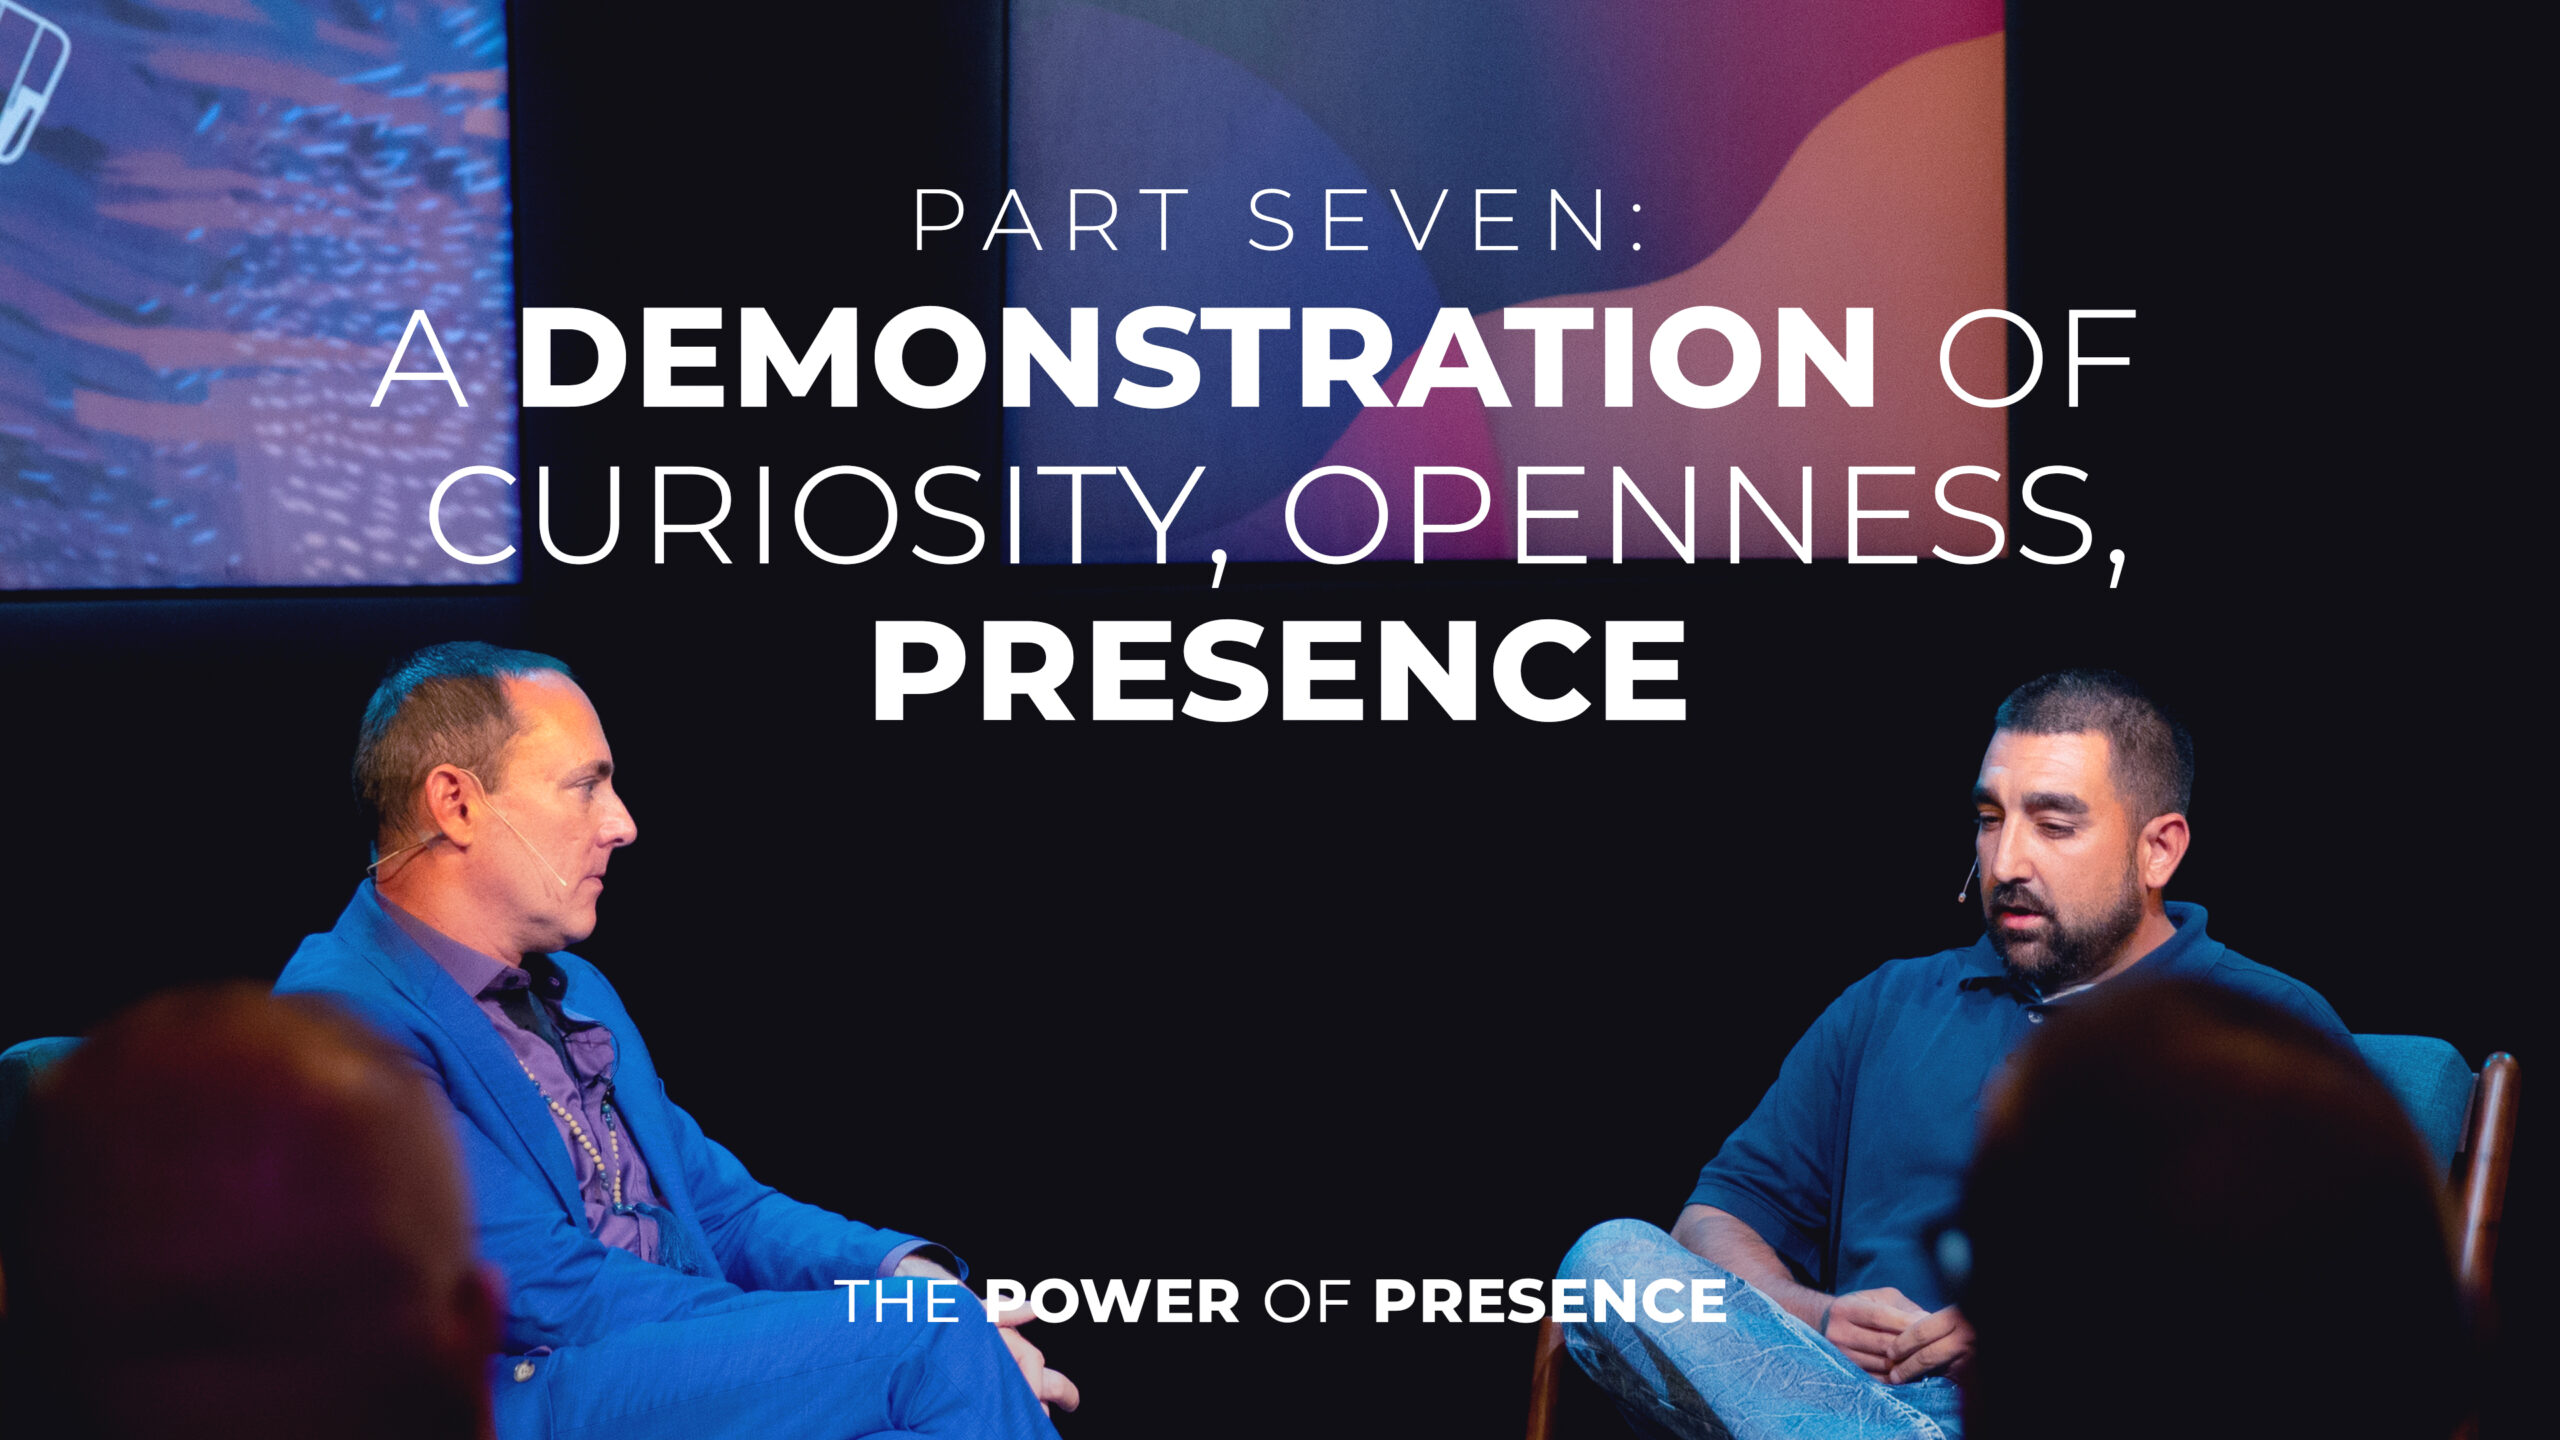 Part Seven: A Demonstration of Curiosity, Openness, Presence